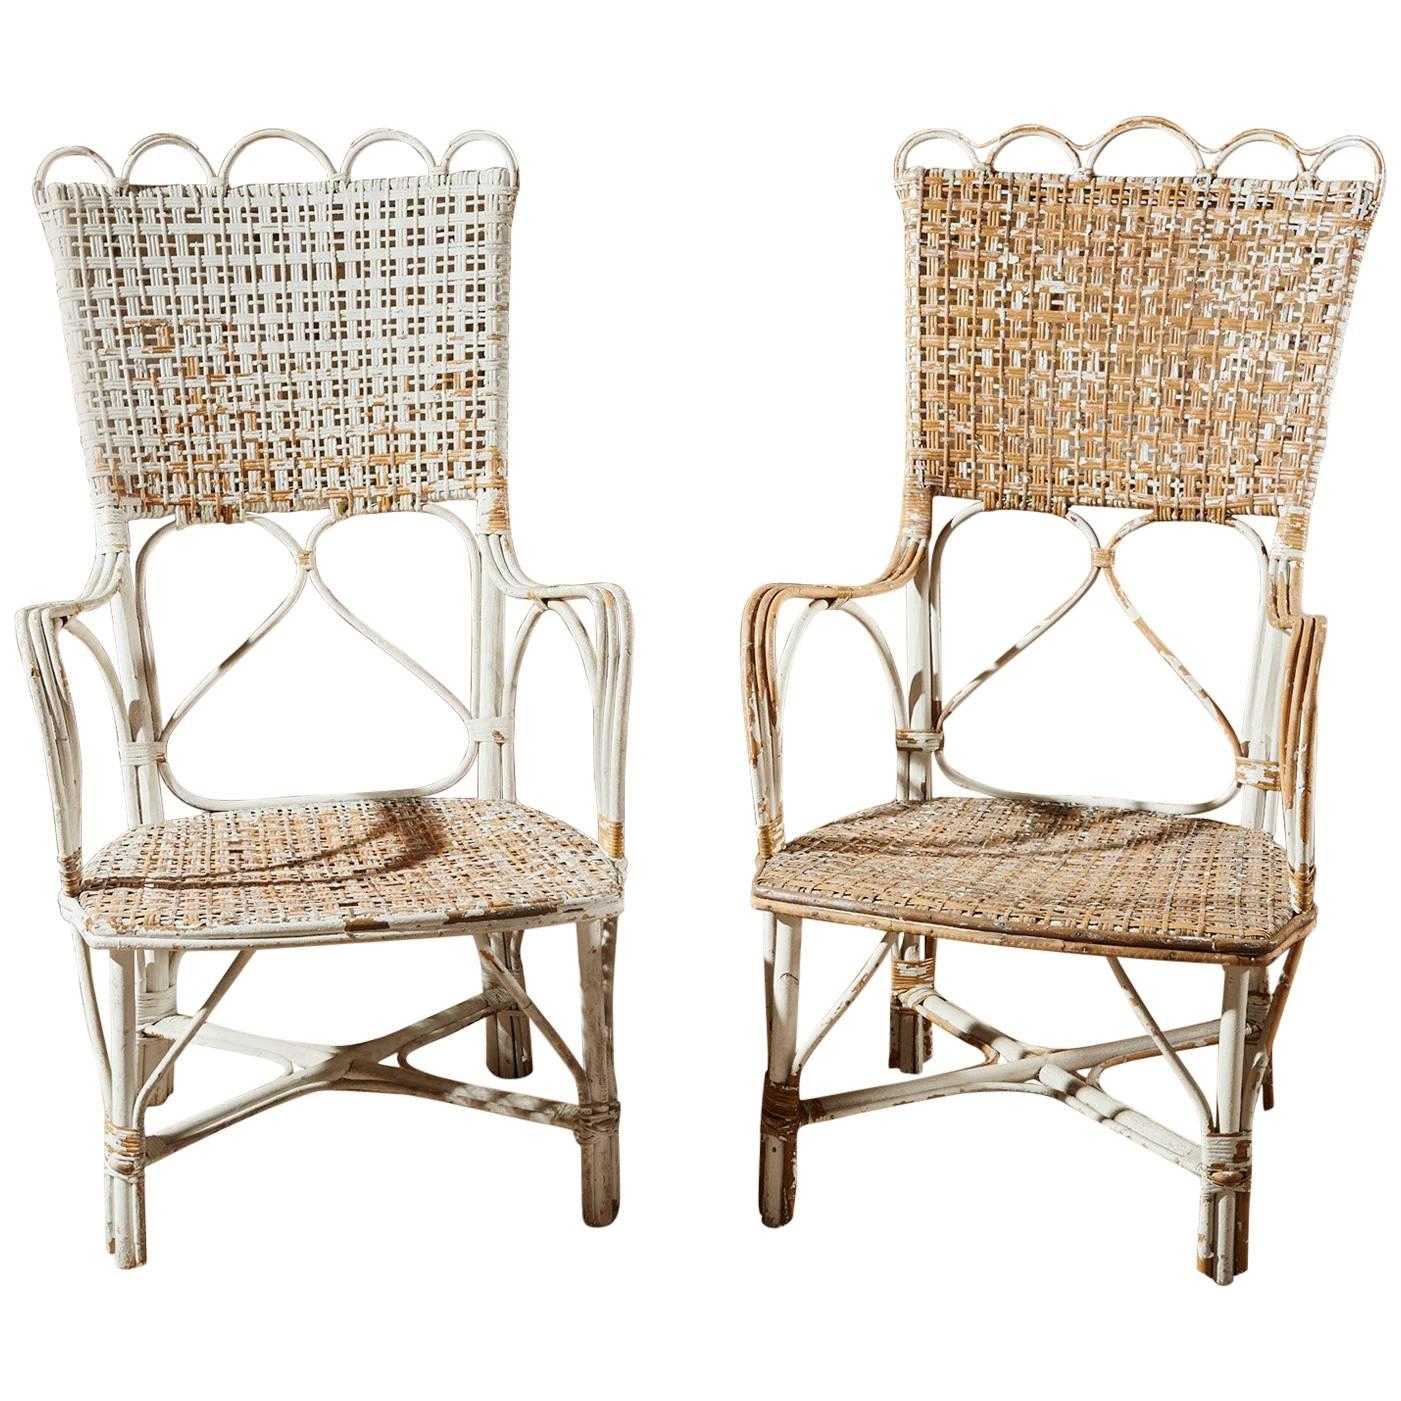 19th Century Wicker Chairs For Sale